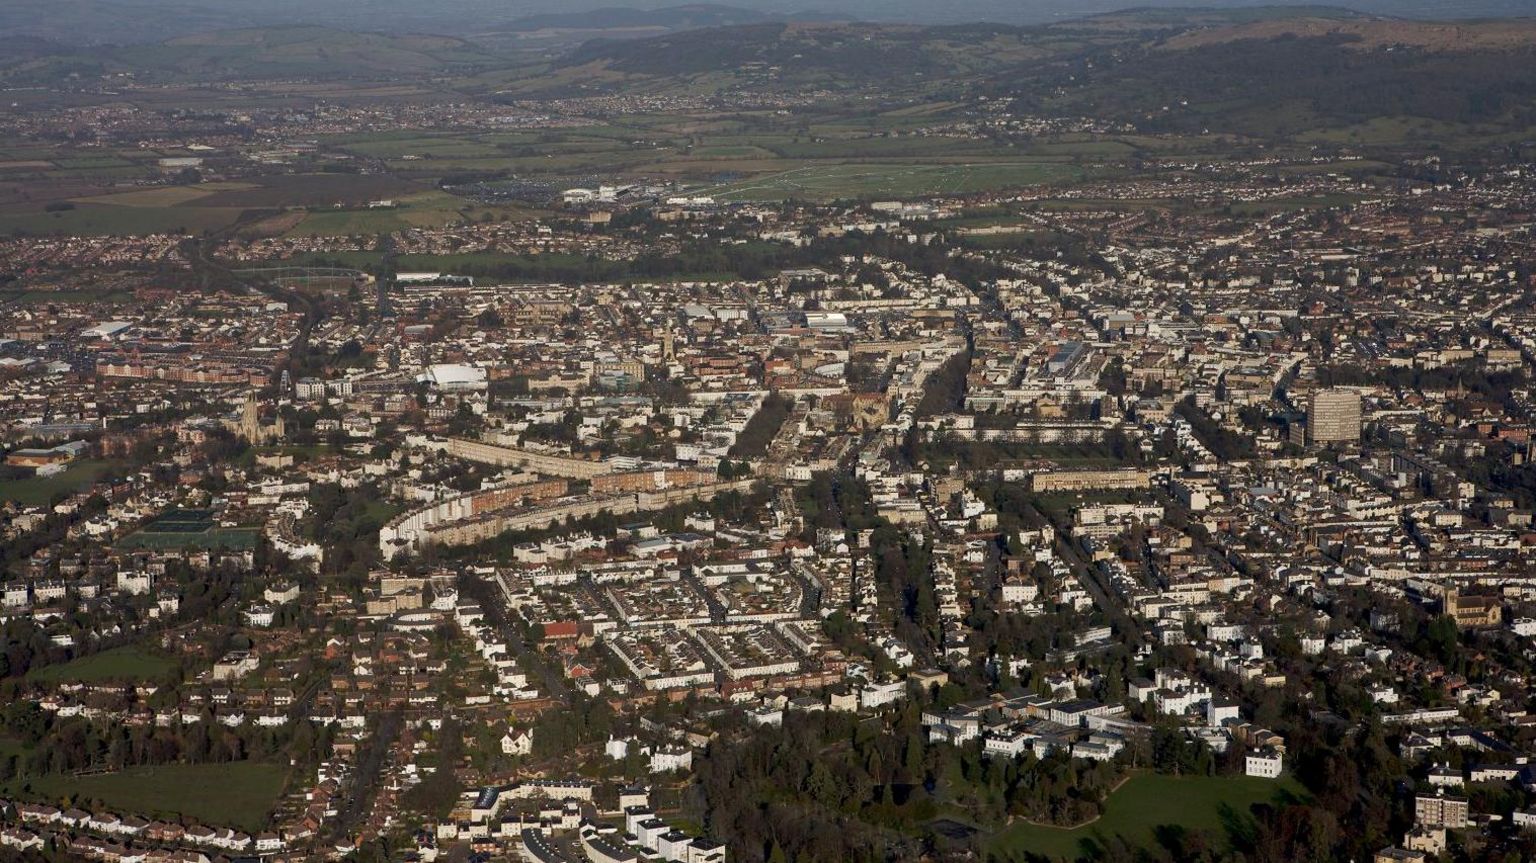 An aerial shot of Cheltenham showing housing estates and the town centre